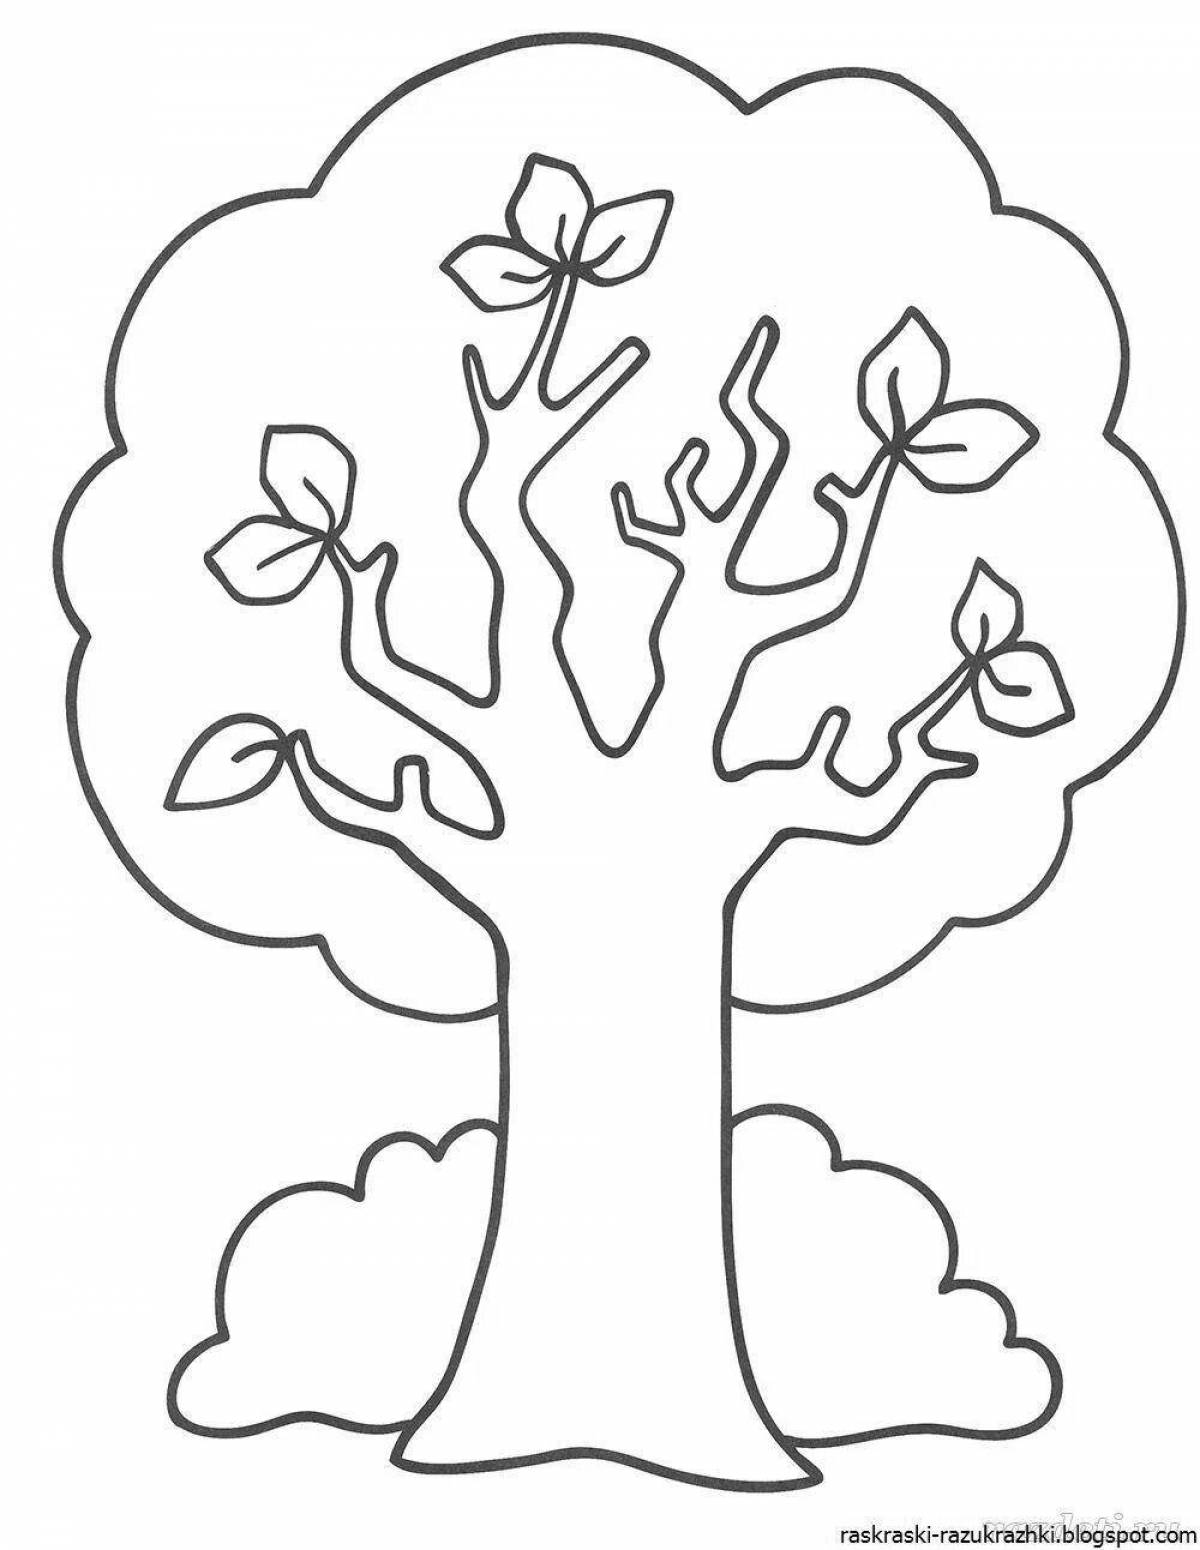 Coloring page with gorgeous tree pattern